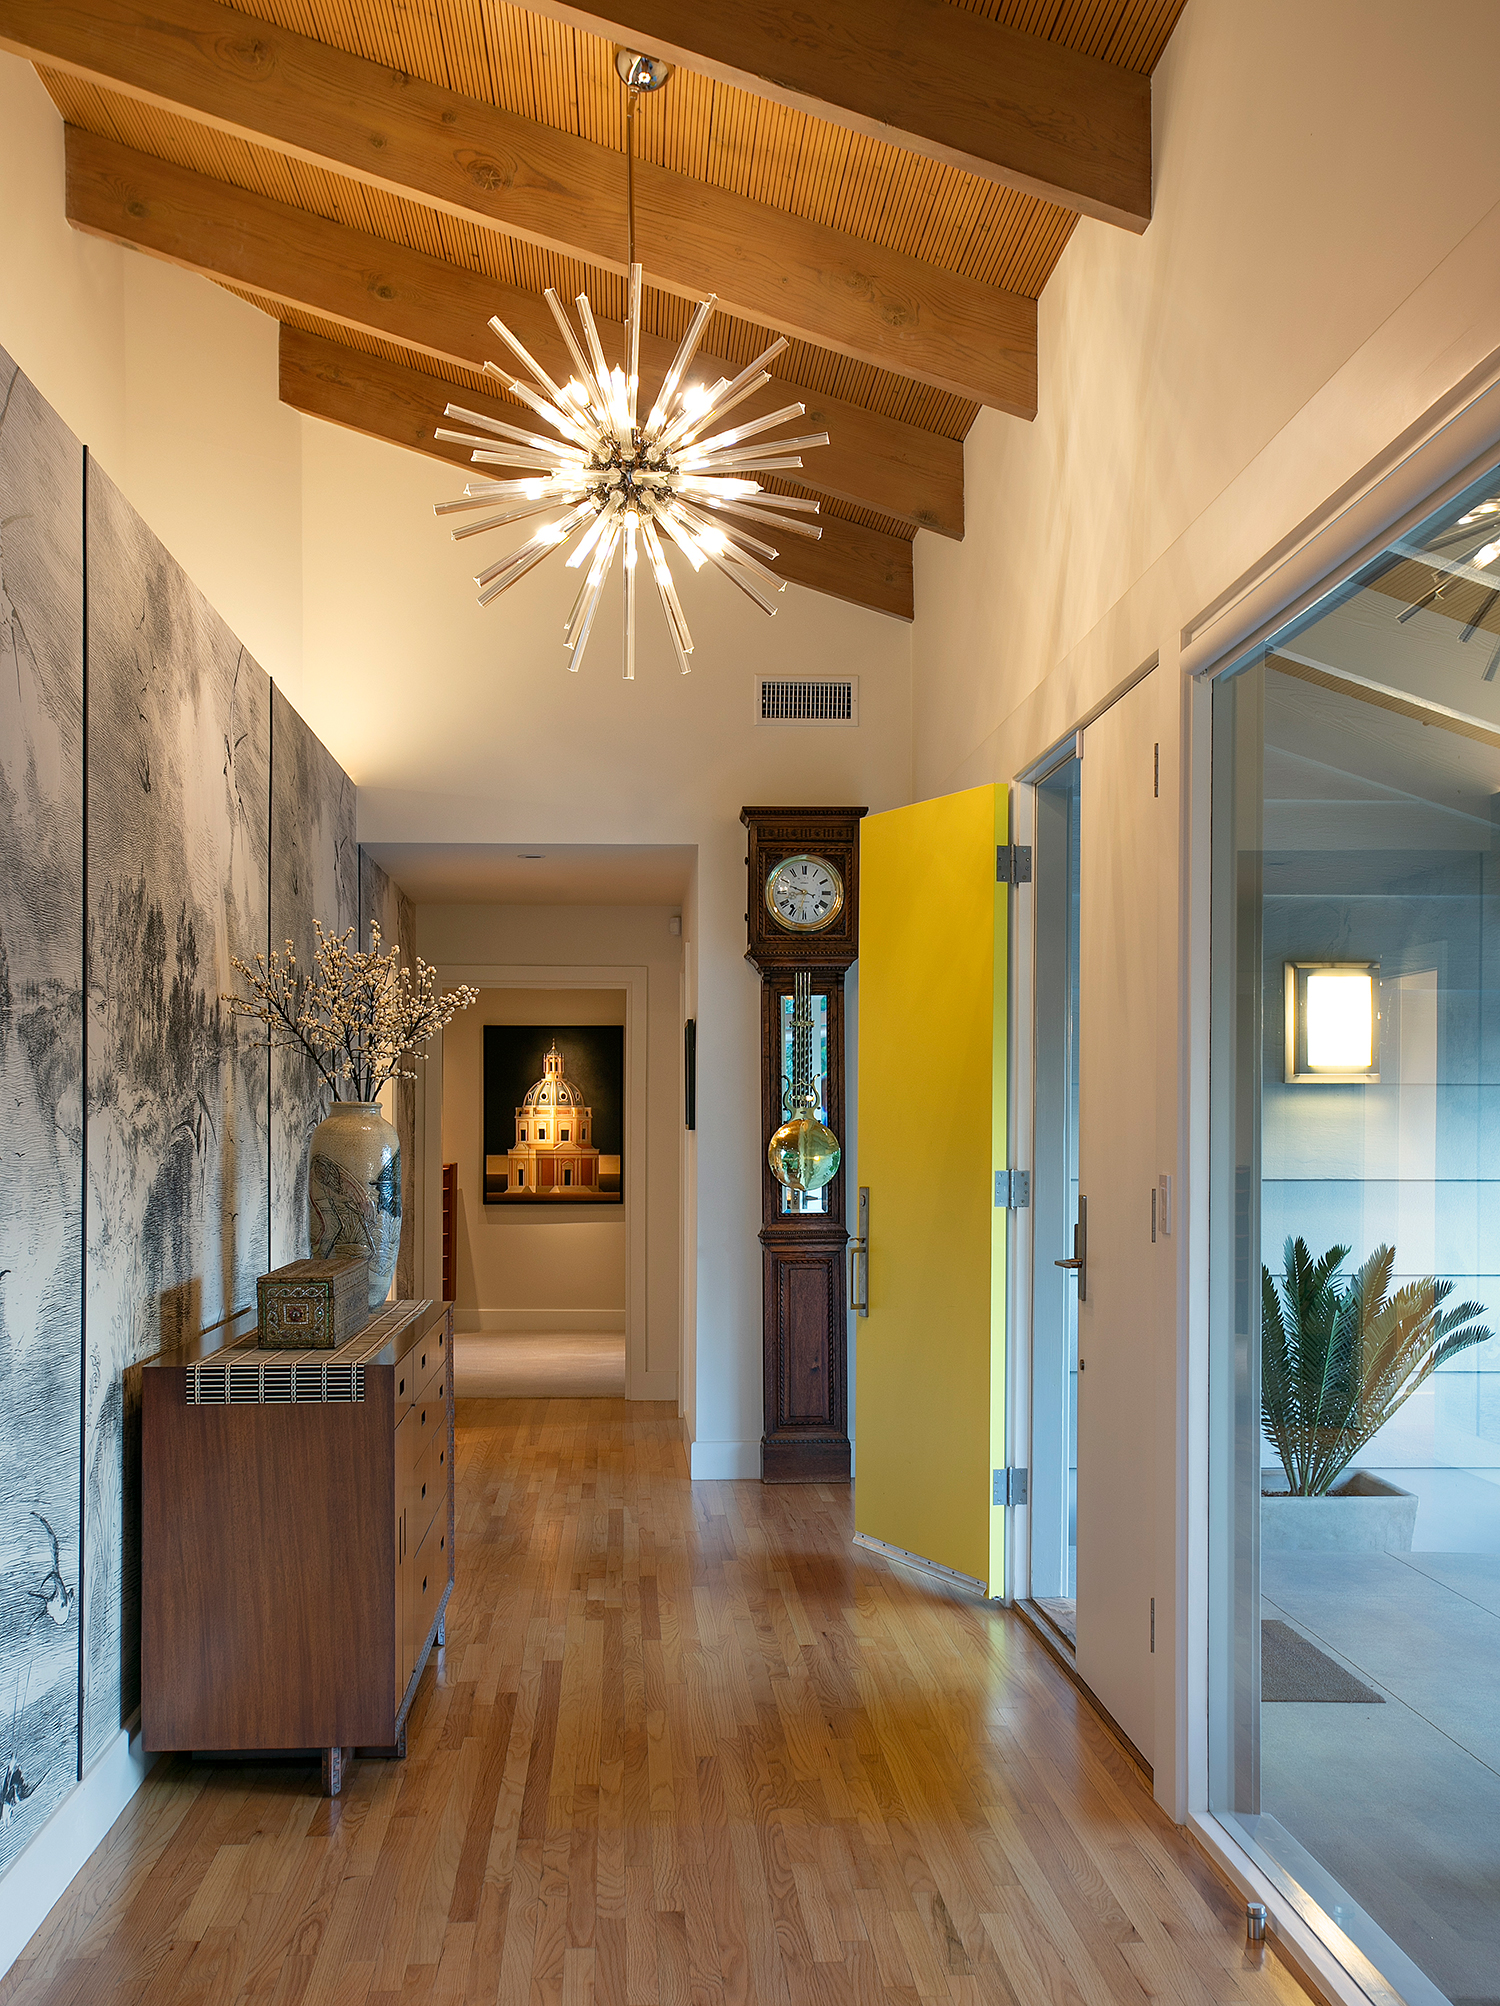 Entryway Starburst Light by Hub of the House Studio